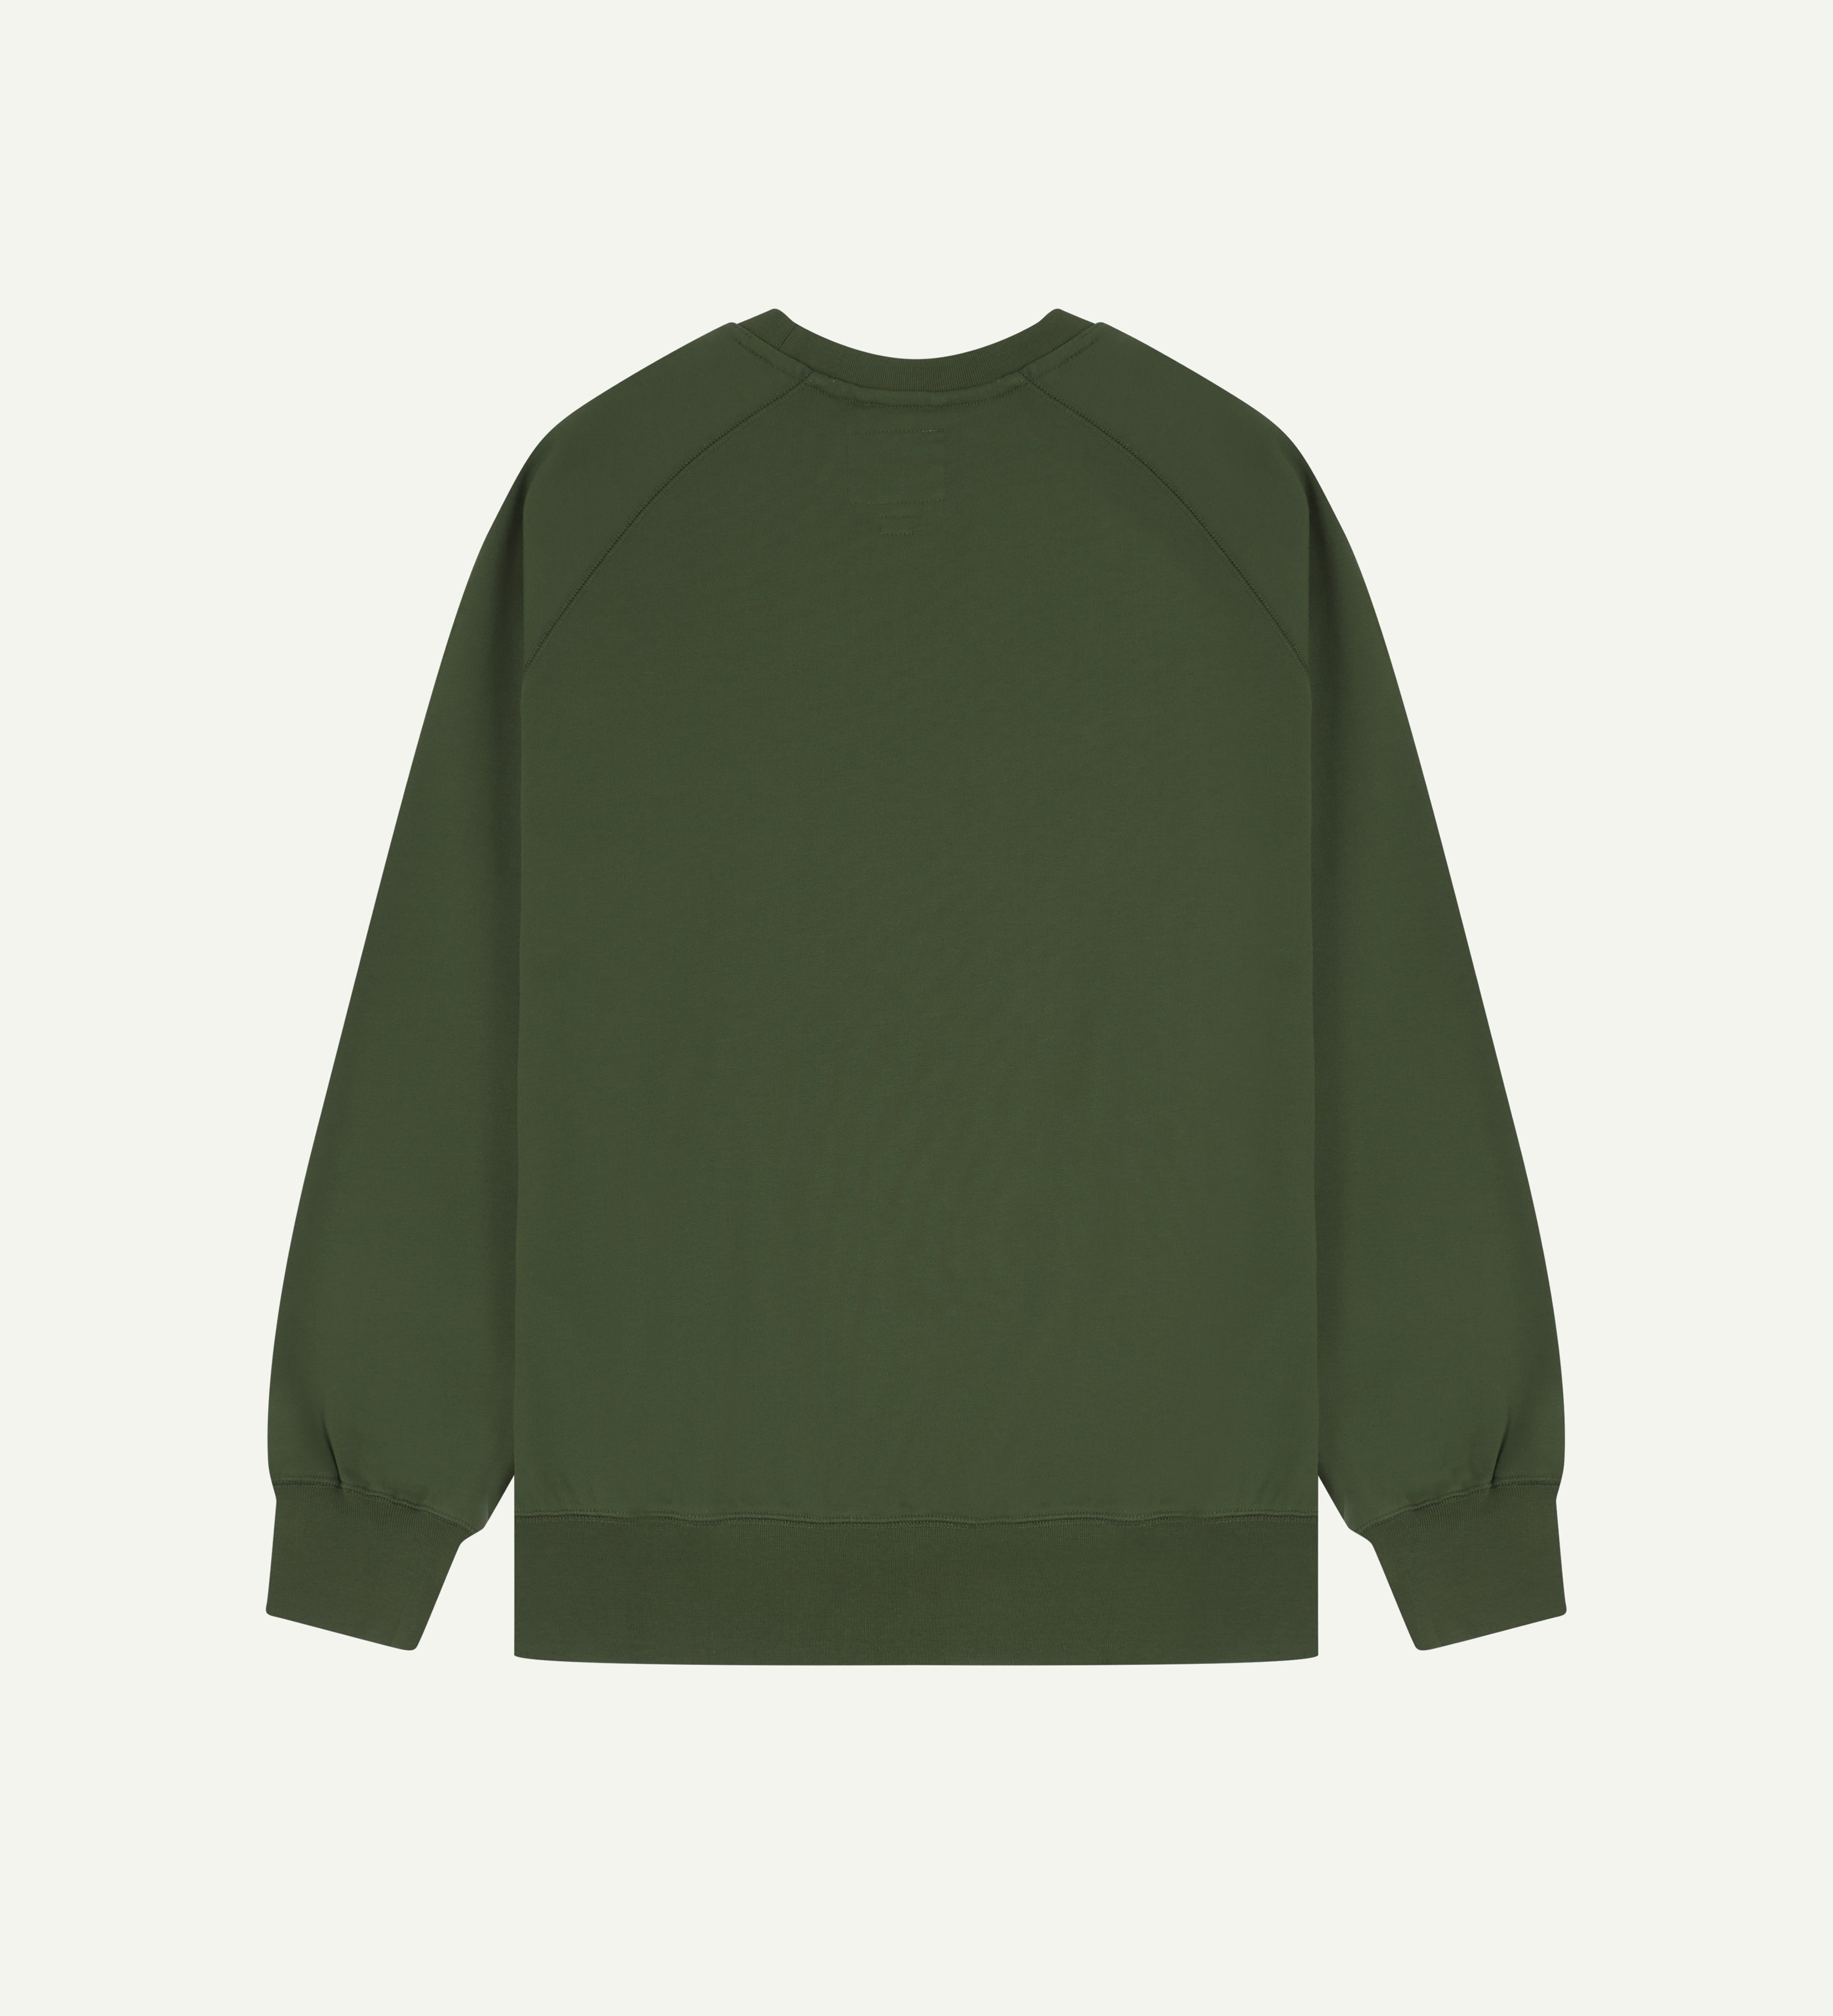 Back view of men's green organic heavyweight cotton #7005 jersey sweatshirt by Uskees